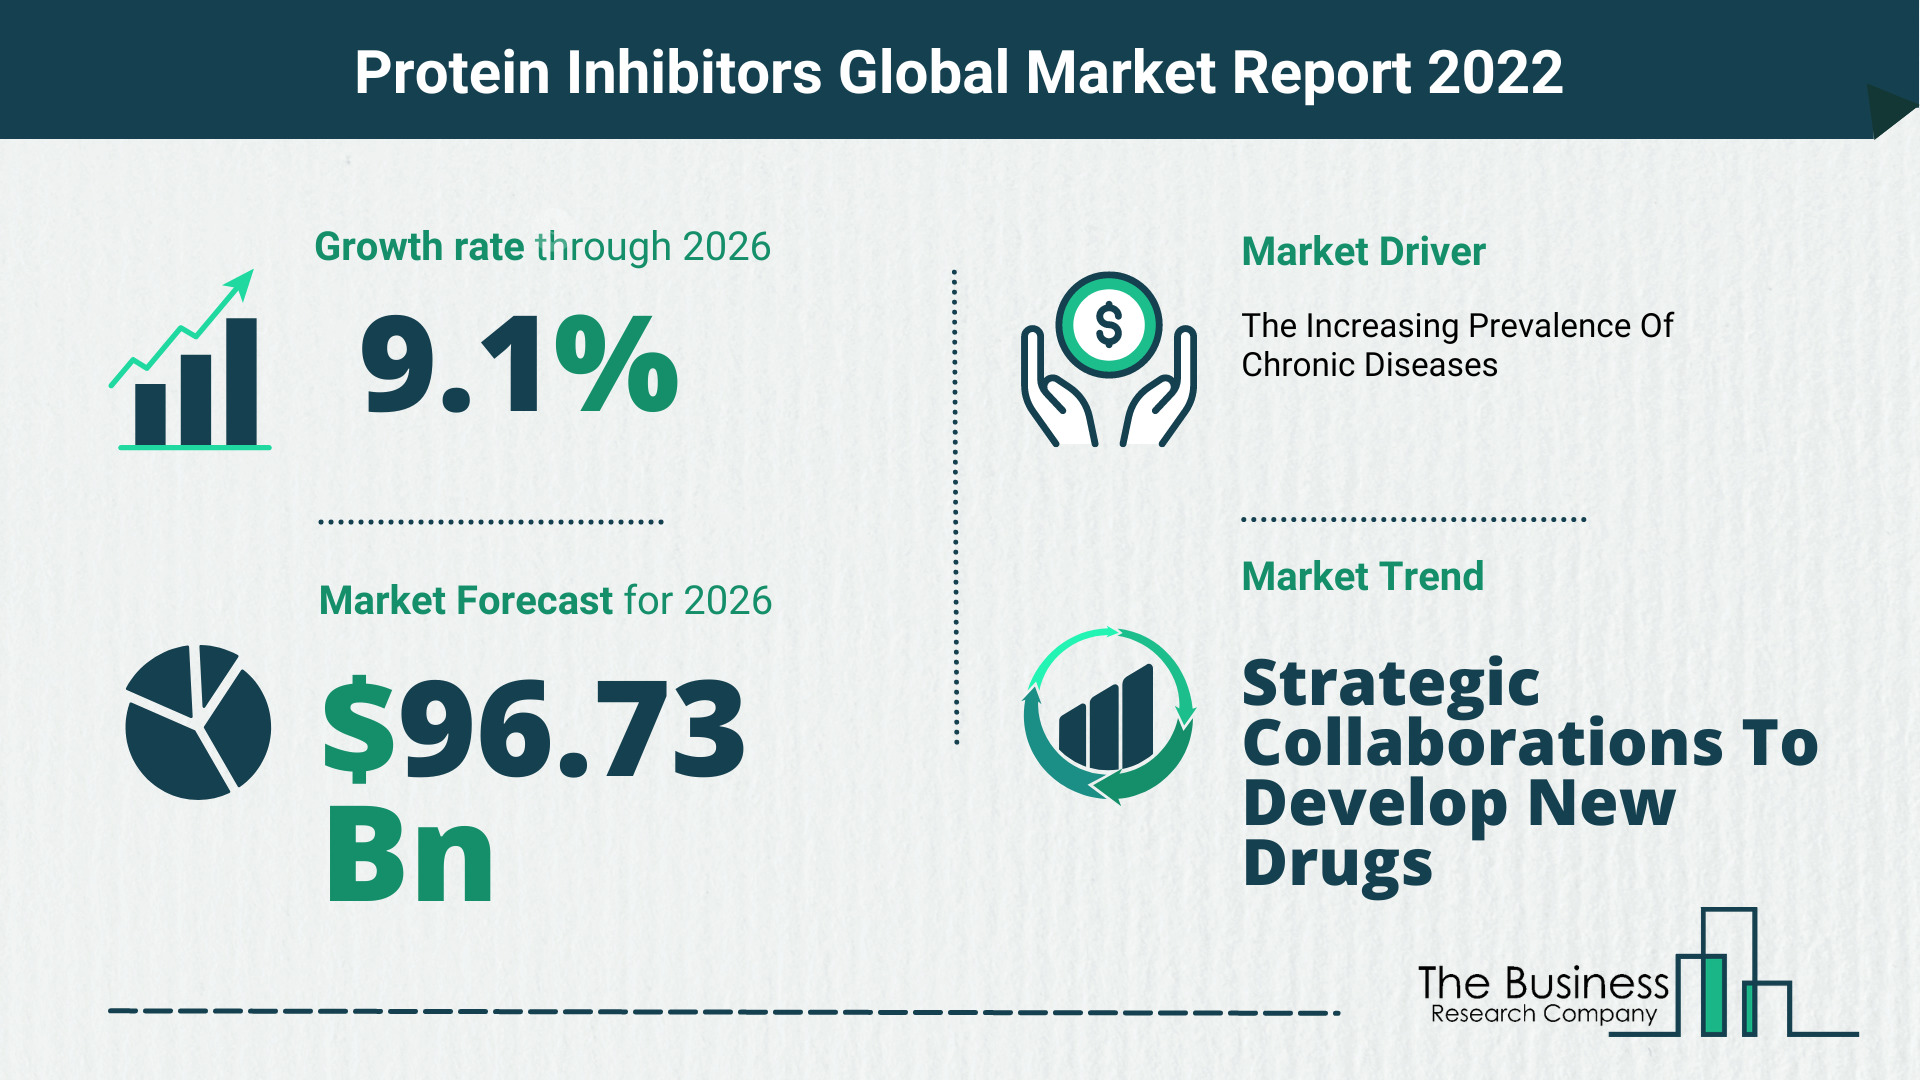 What Is The Protein Inhibitors Market Overview In 2022?